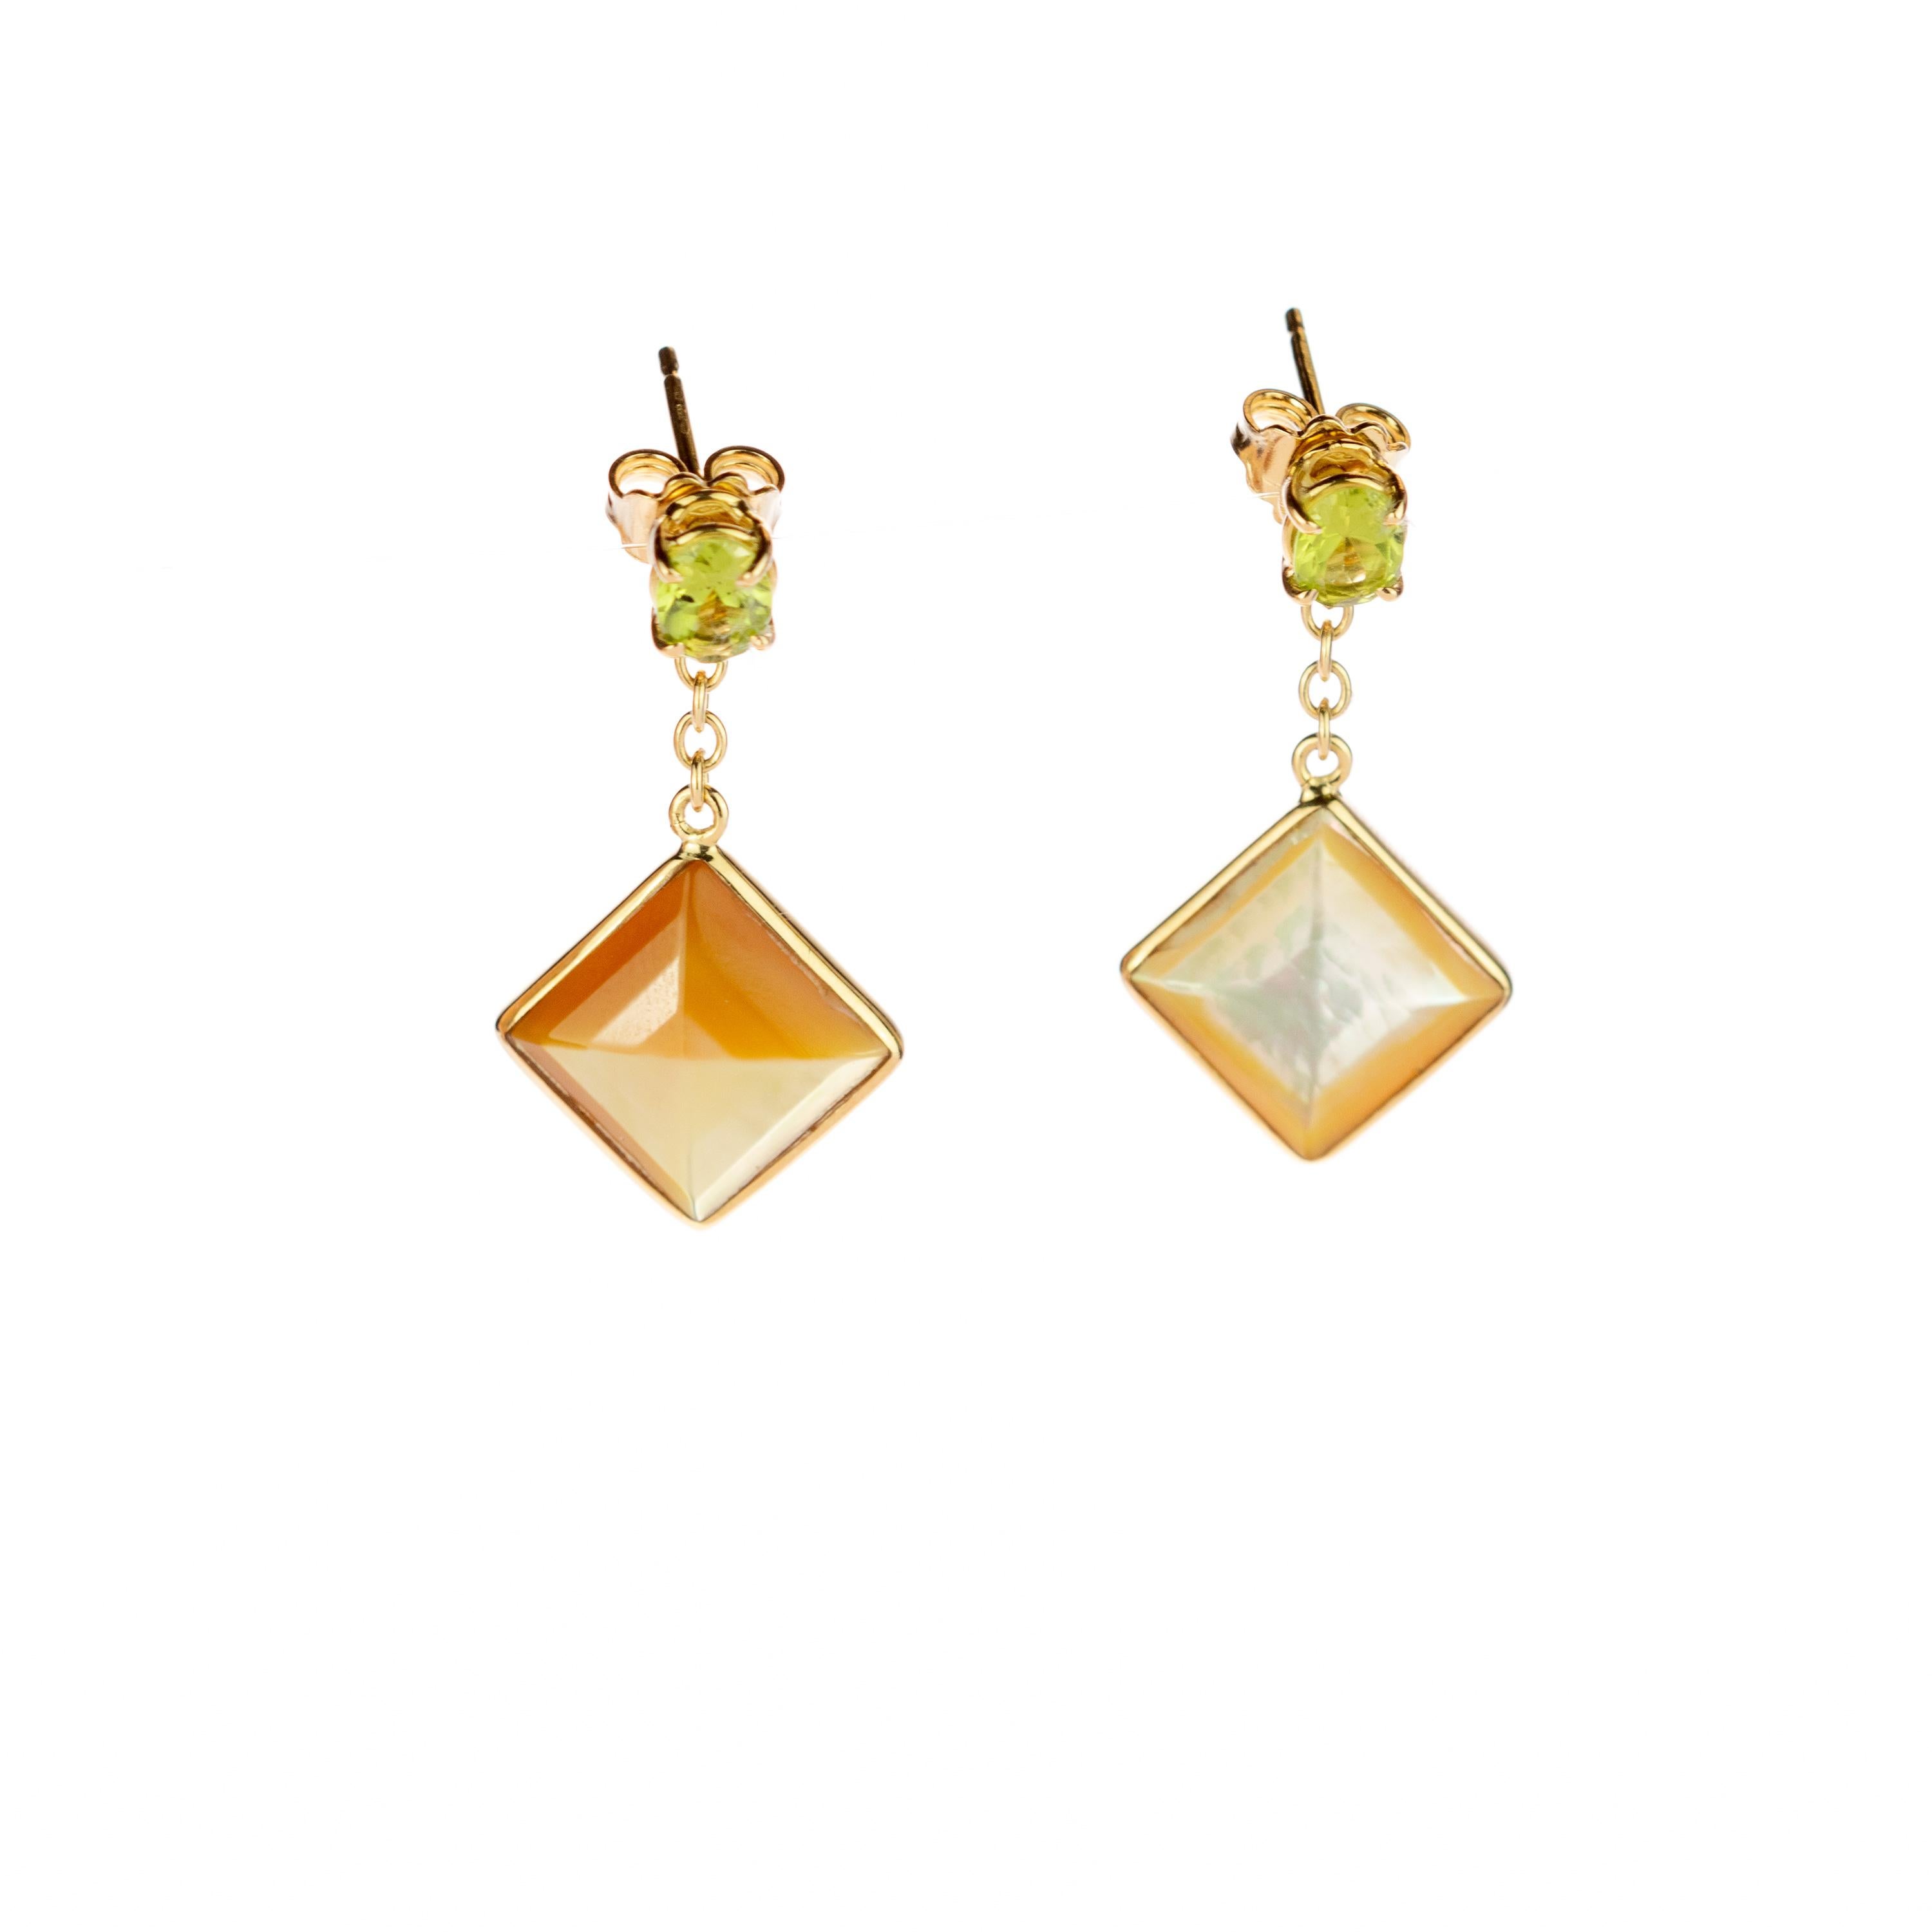 Marvelous square Mother of Pearl and 2 carats natural Peridot drop earrings surrounded by delicate 18 karat yellow gold details. Evoking all the italian tradition resulting in a stunning masterpiece with an outstanding display of color and a high